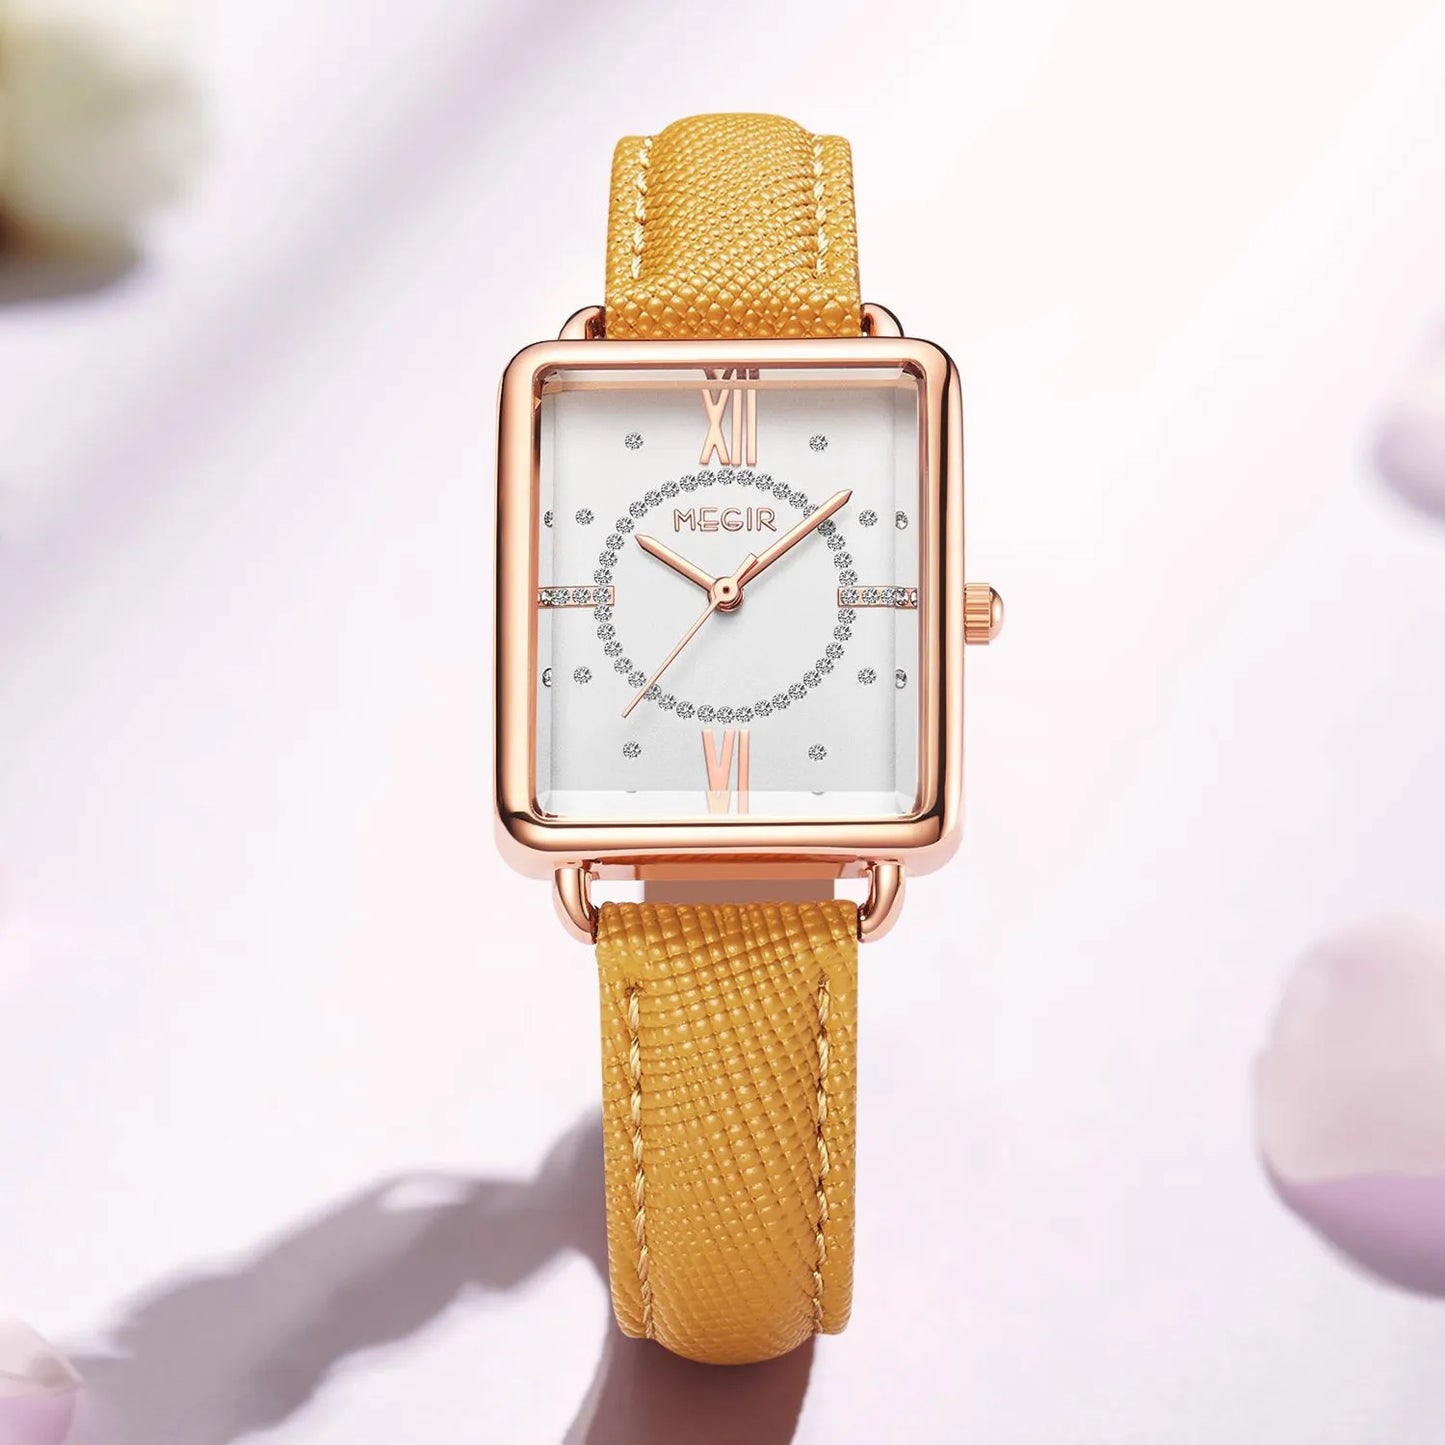 Megir Fashion Quartz Watch with beautiful Leather Strap and Water Resistant